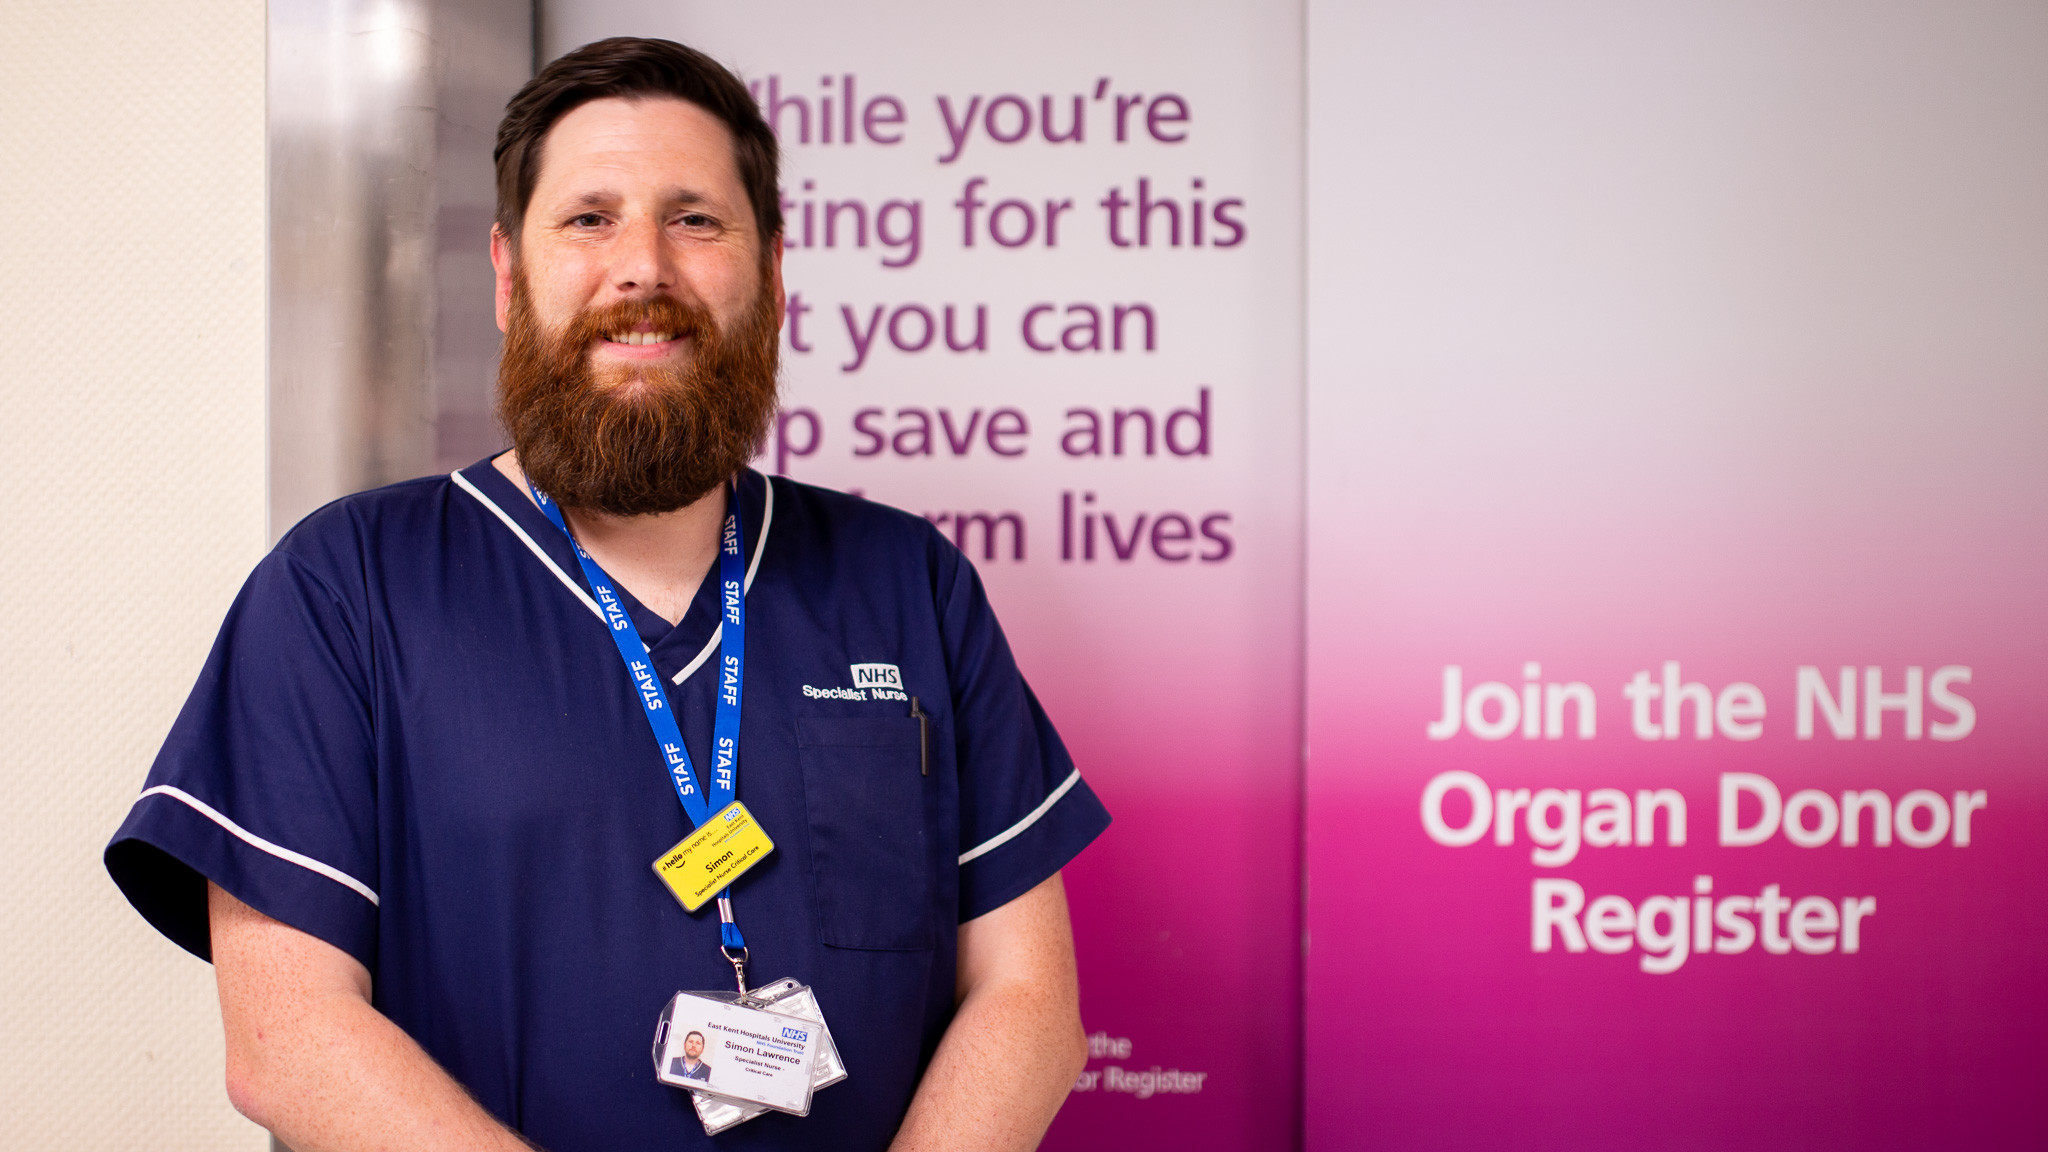 Simon Lawrence, specialist organ donation nurse. He is wearing a blue uniform and standing in front of a sign advertising the NHS organ donor register